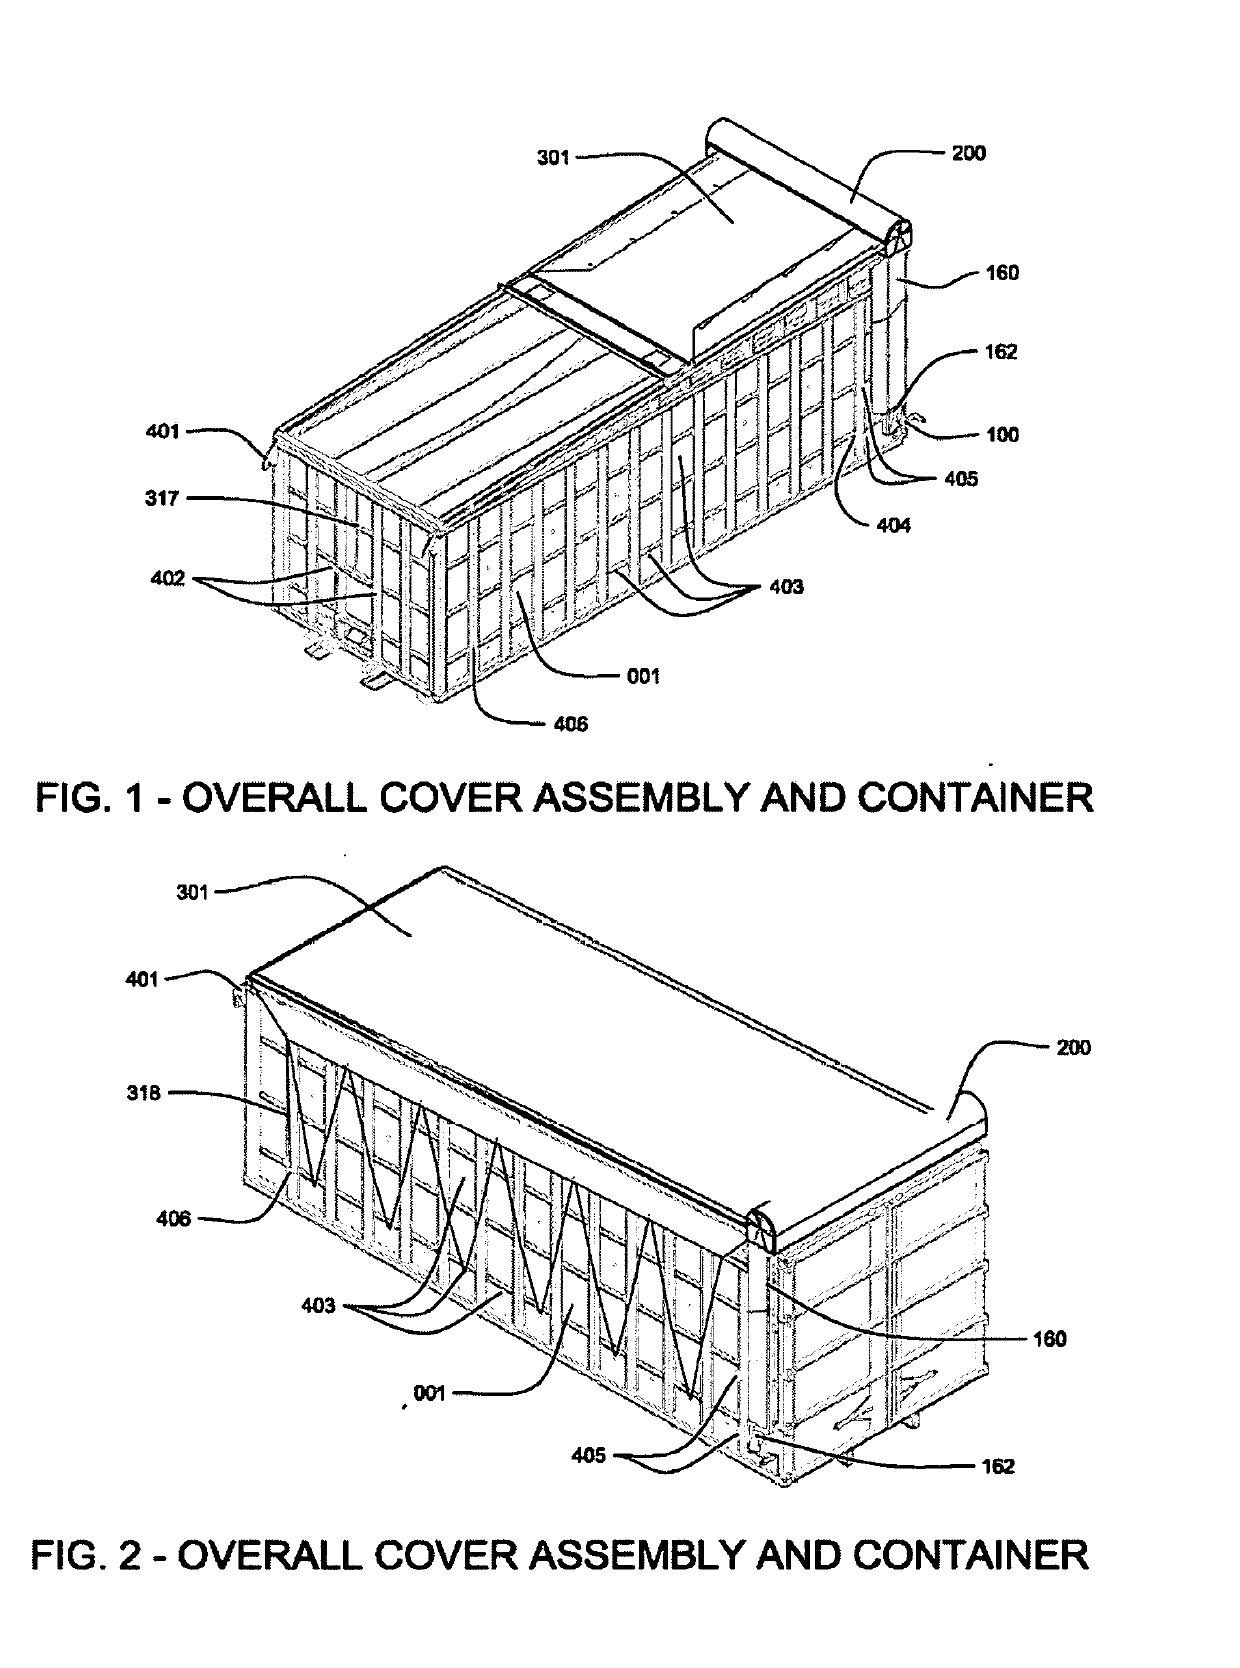 Retractable Fabric Cover for Rectangular Containers